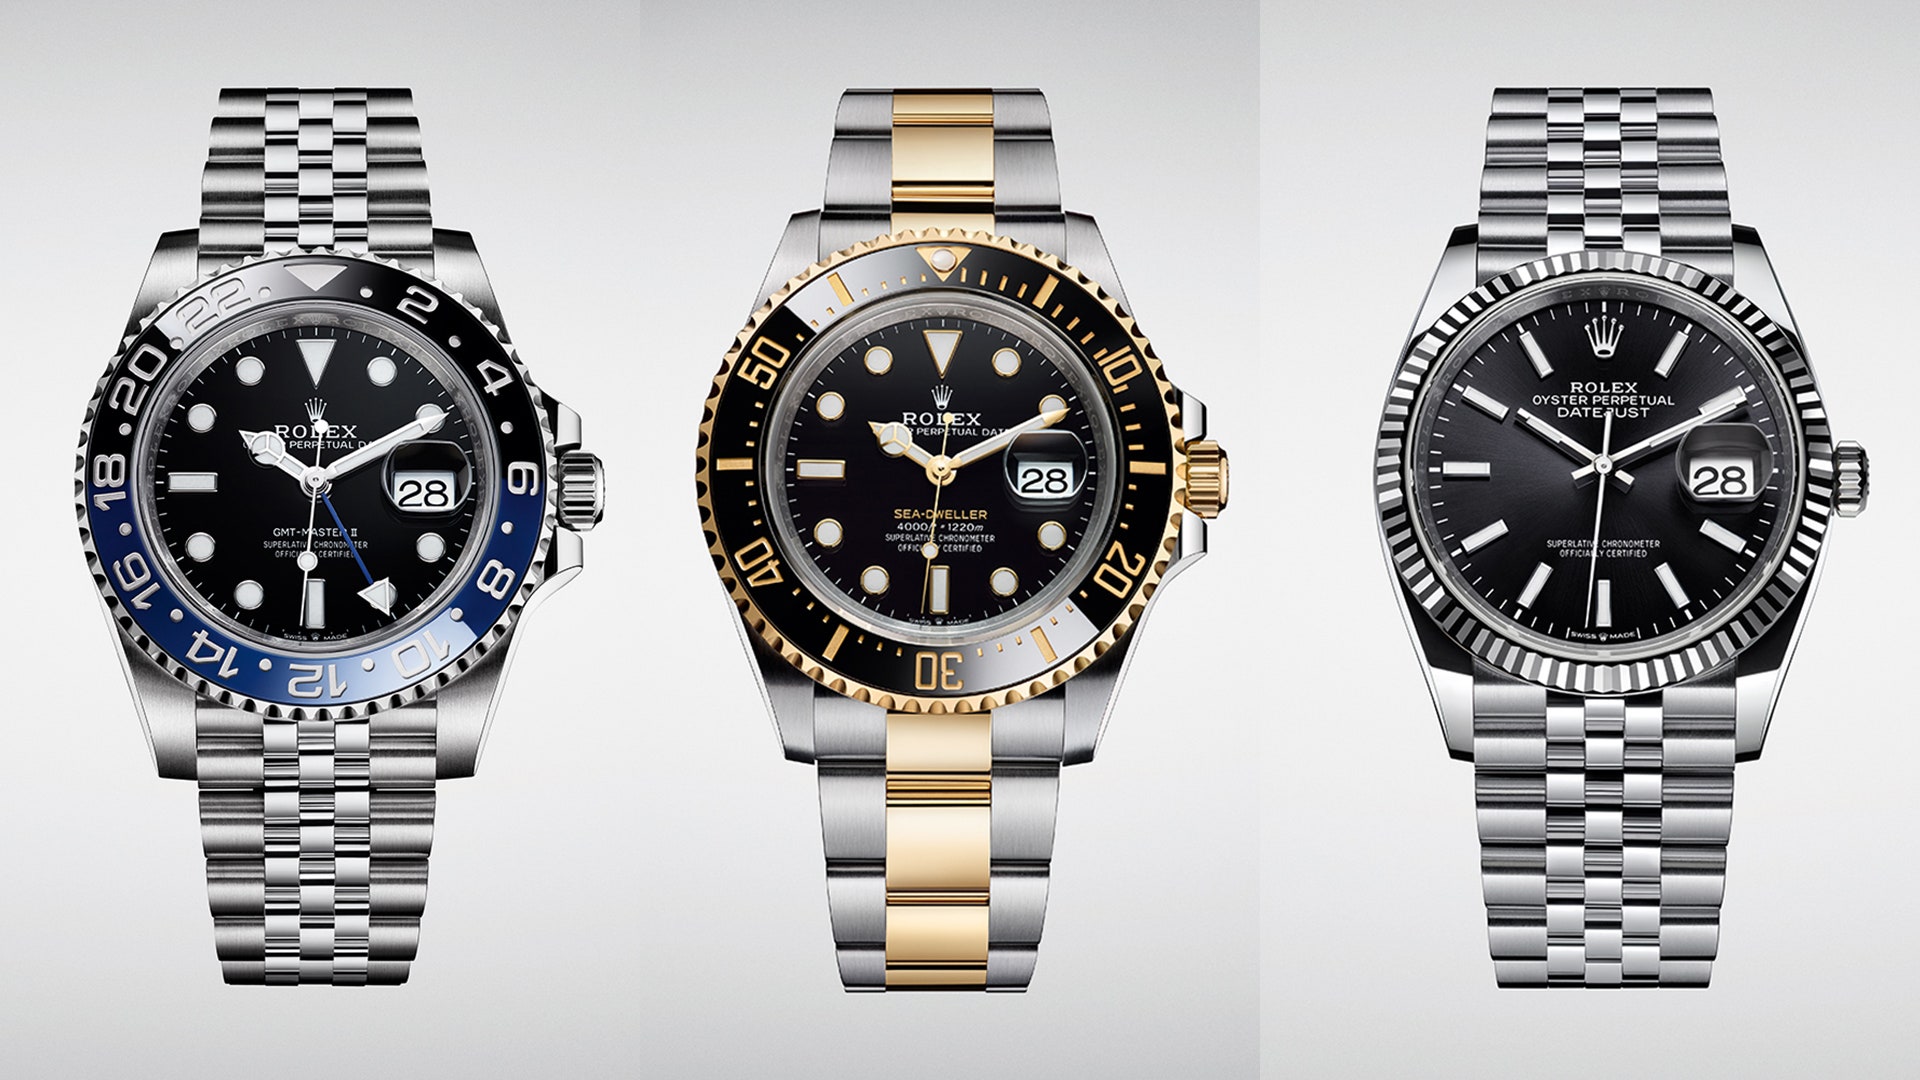 How to find the best fake Rolex watch?